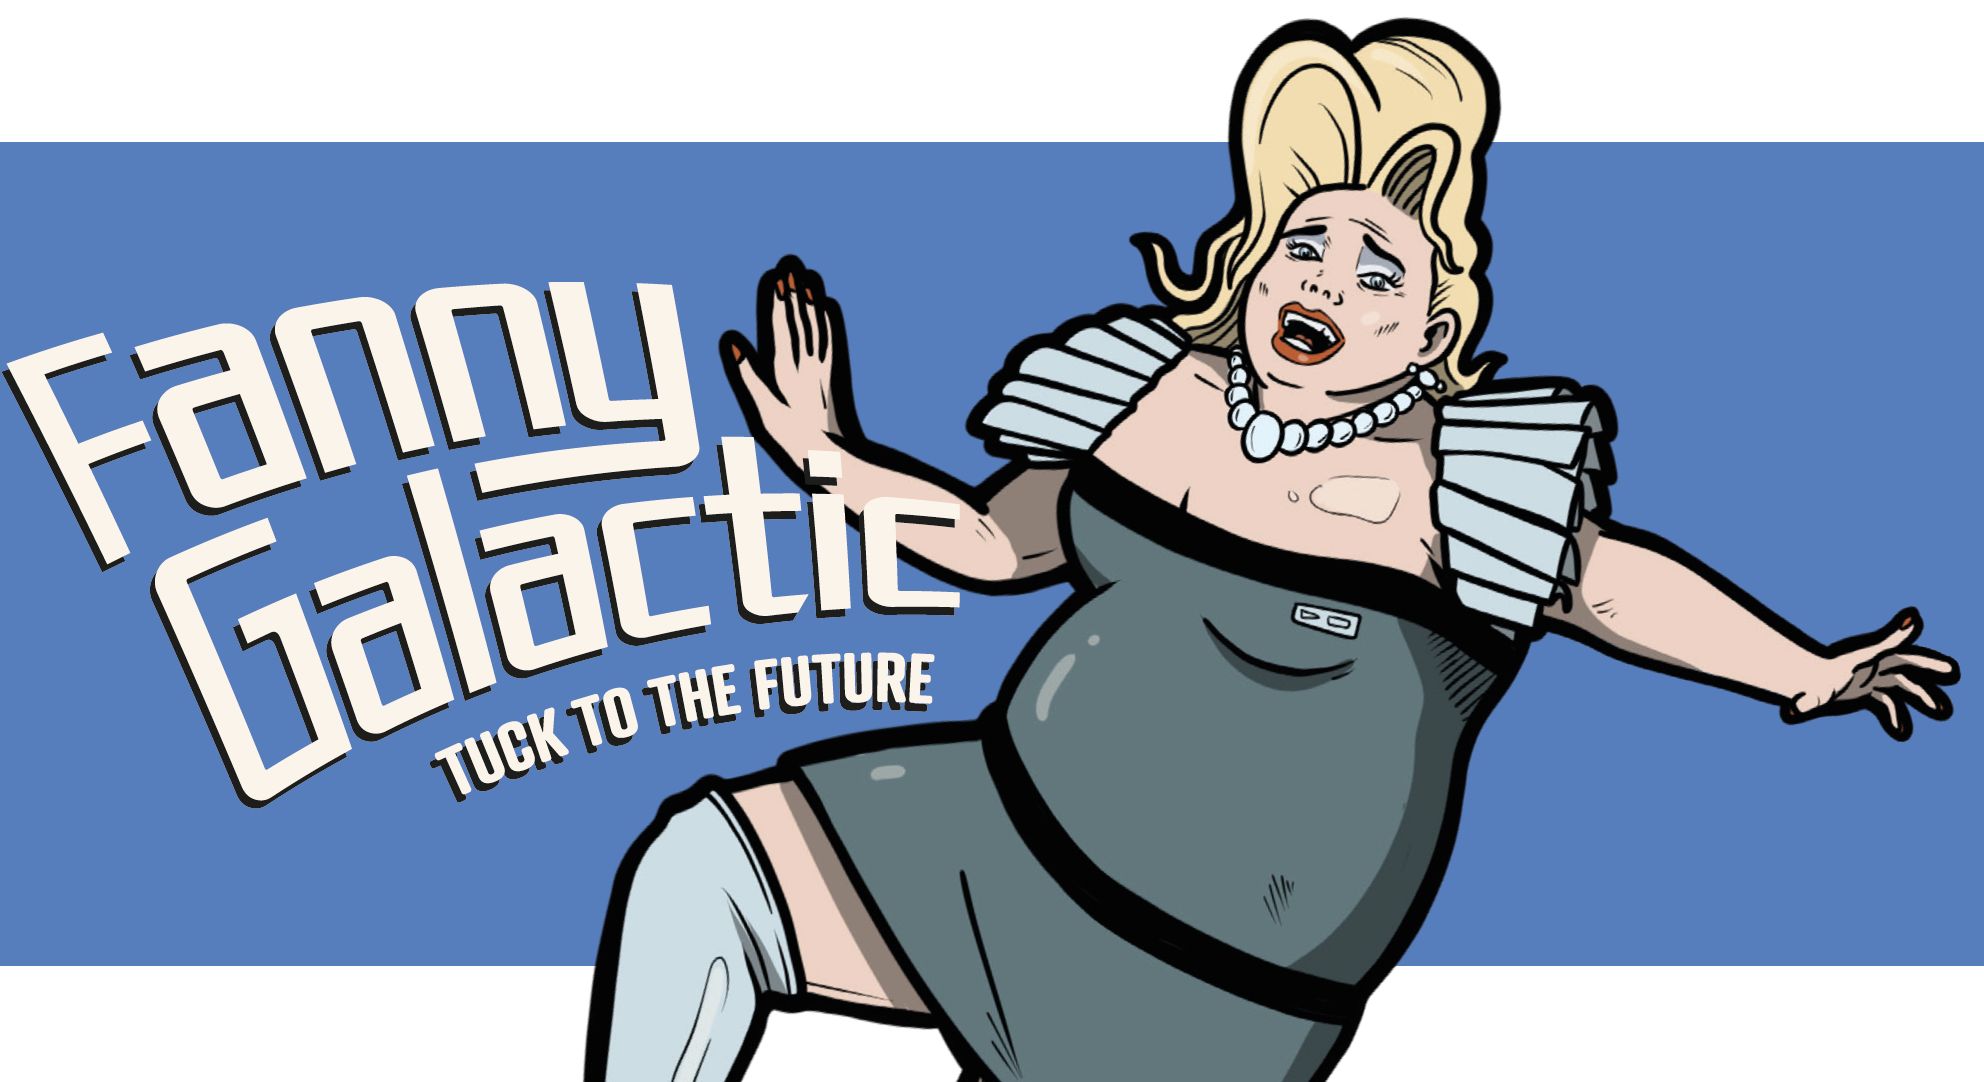 Fanny Galactic: Tuck to the Future, cover image